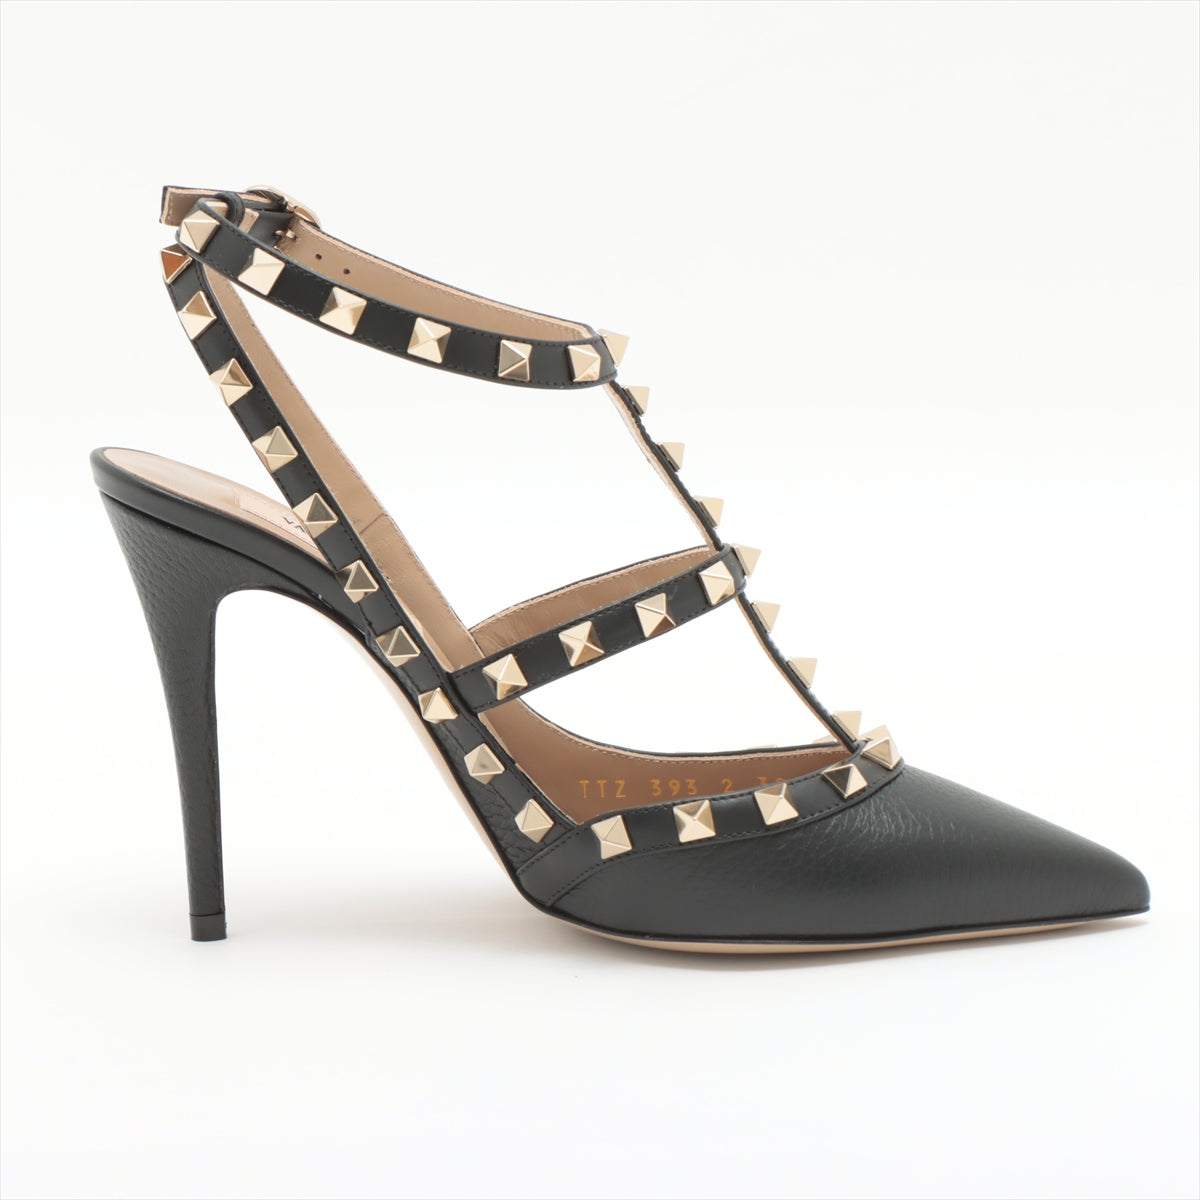 Valentino Garavani Rock Studs Leather Pumps 38 Ladies' Black box sack replacement studs There is a replacement lift